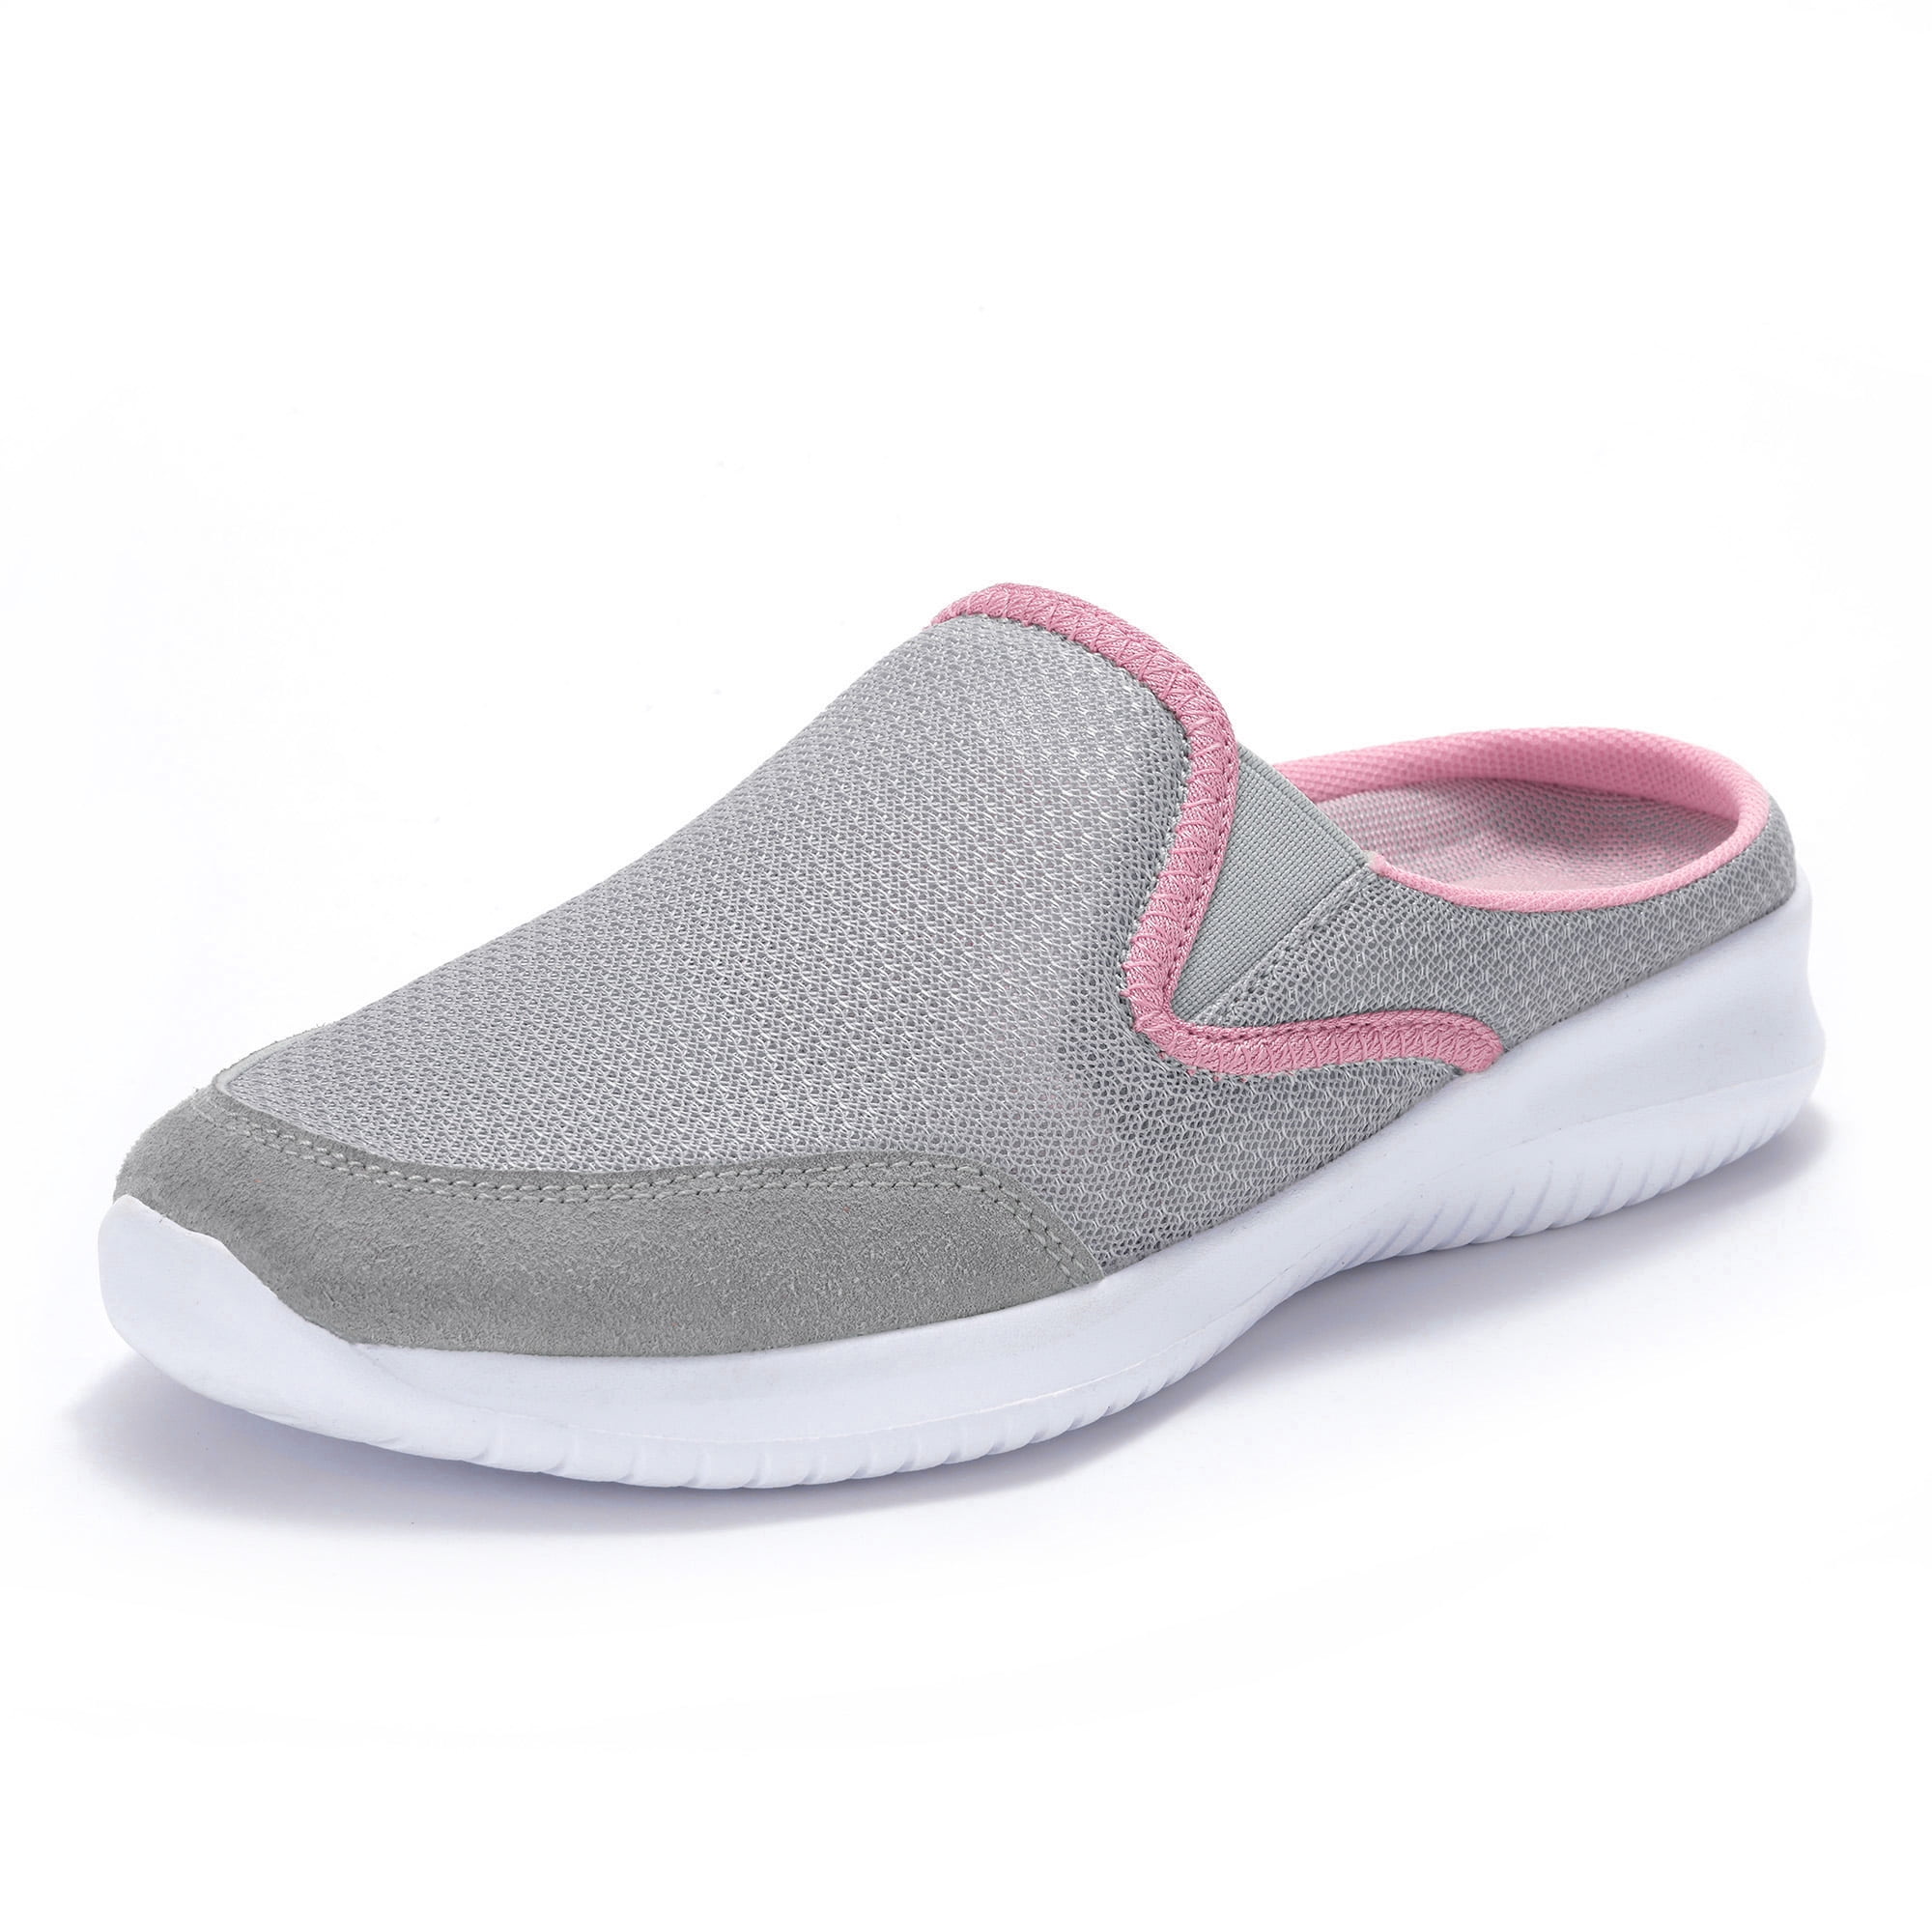 SIMANLAN Womens Mules Shoes Backless Sneaker Mules Closed Toe Slip on ...